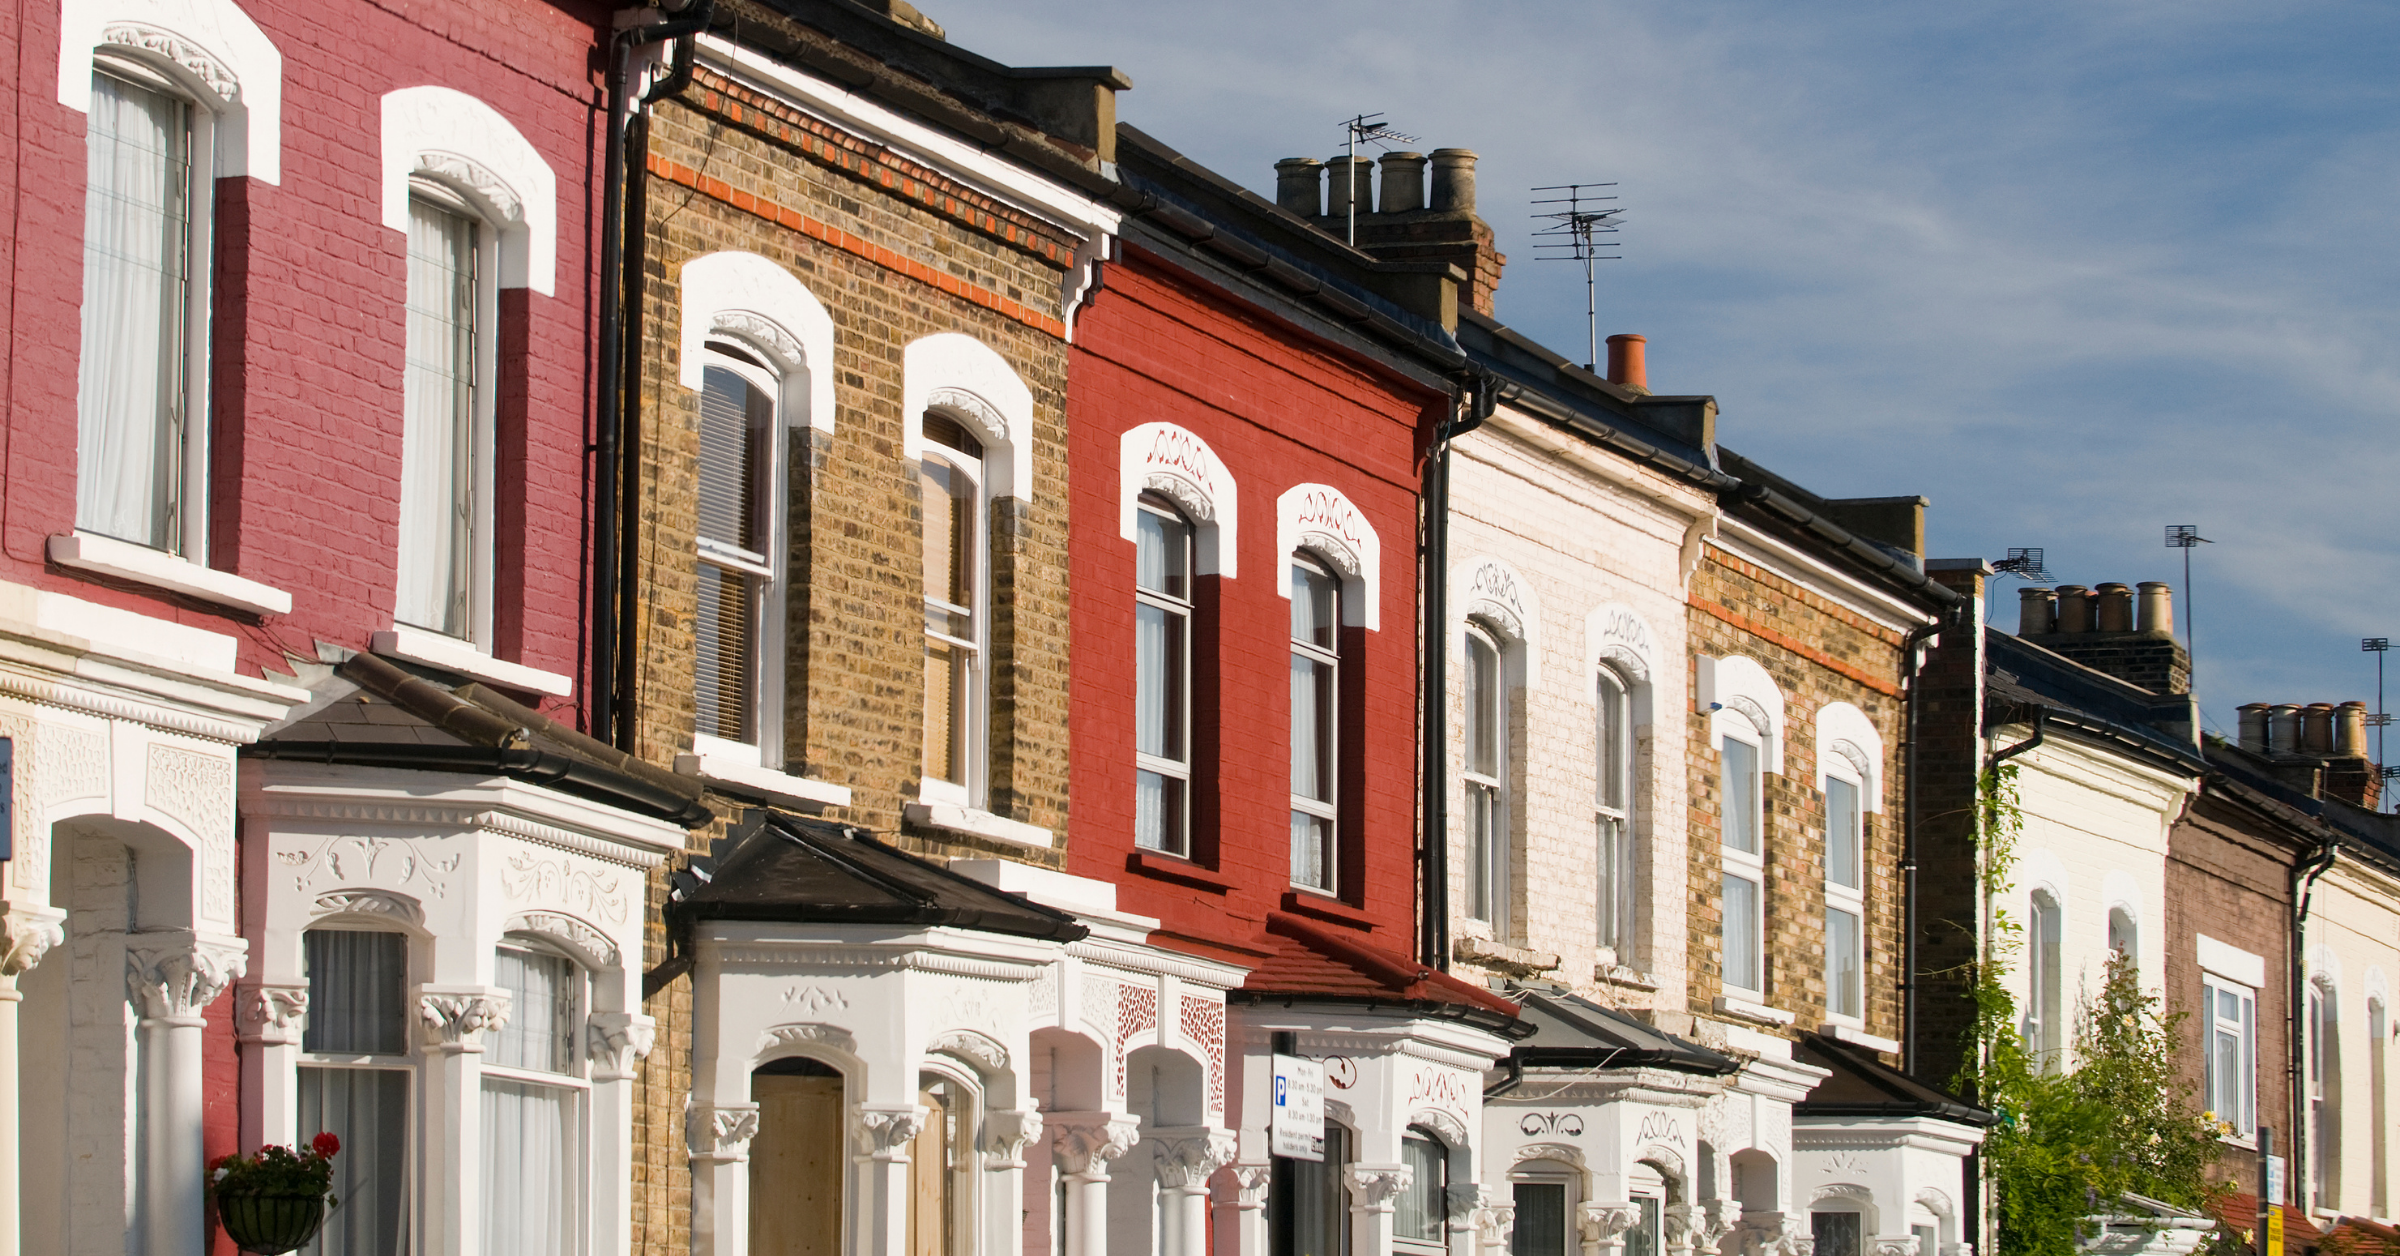 11,471 Doncaster Terraced Houses Why are they so popular?